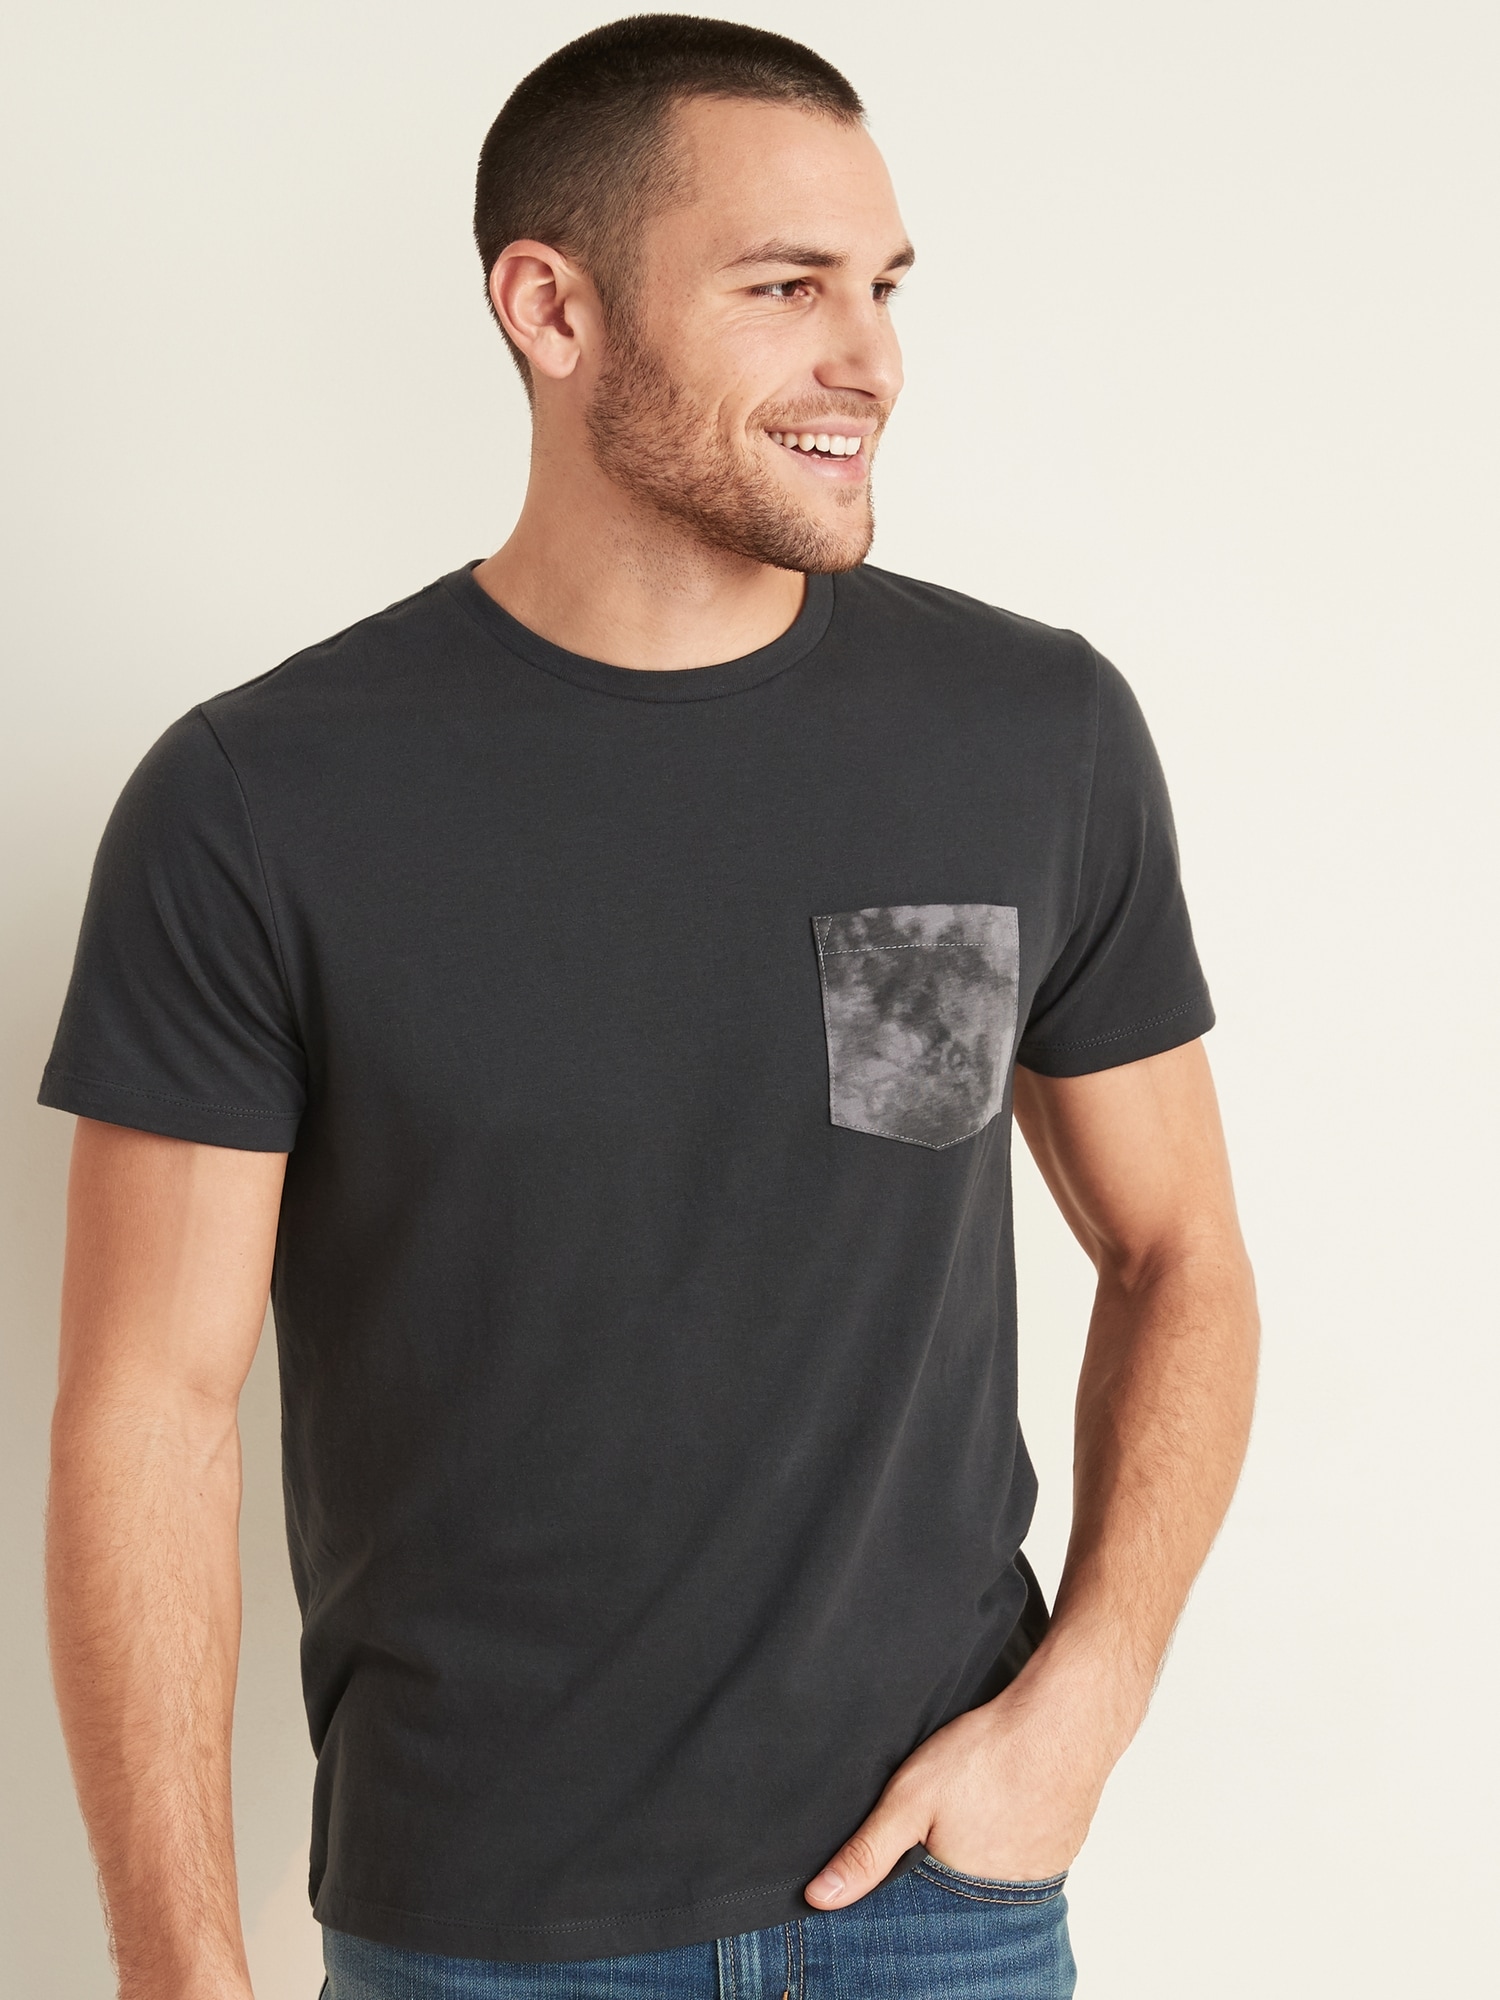 Soft-Washed Graphic Chest-Pocket Tee for Men | Old Navy